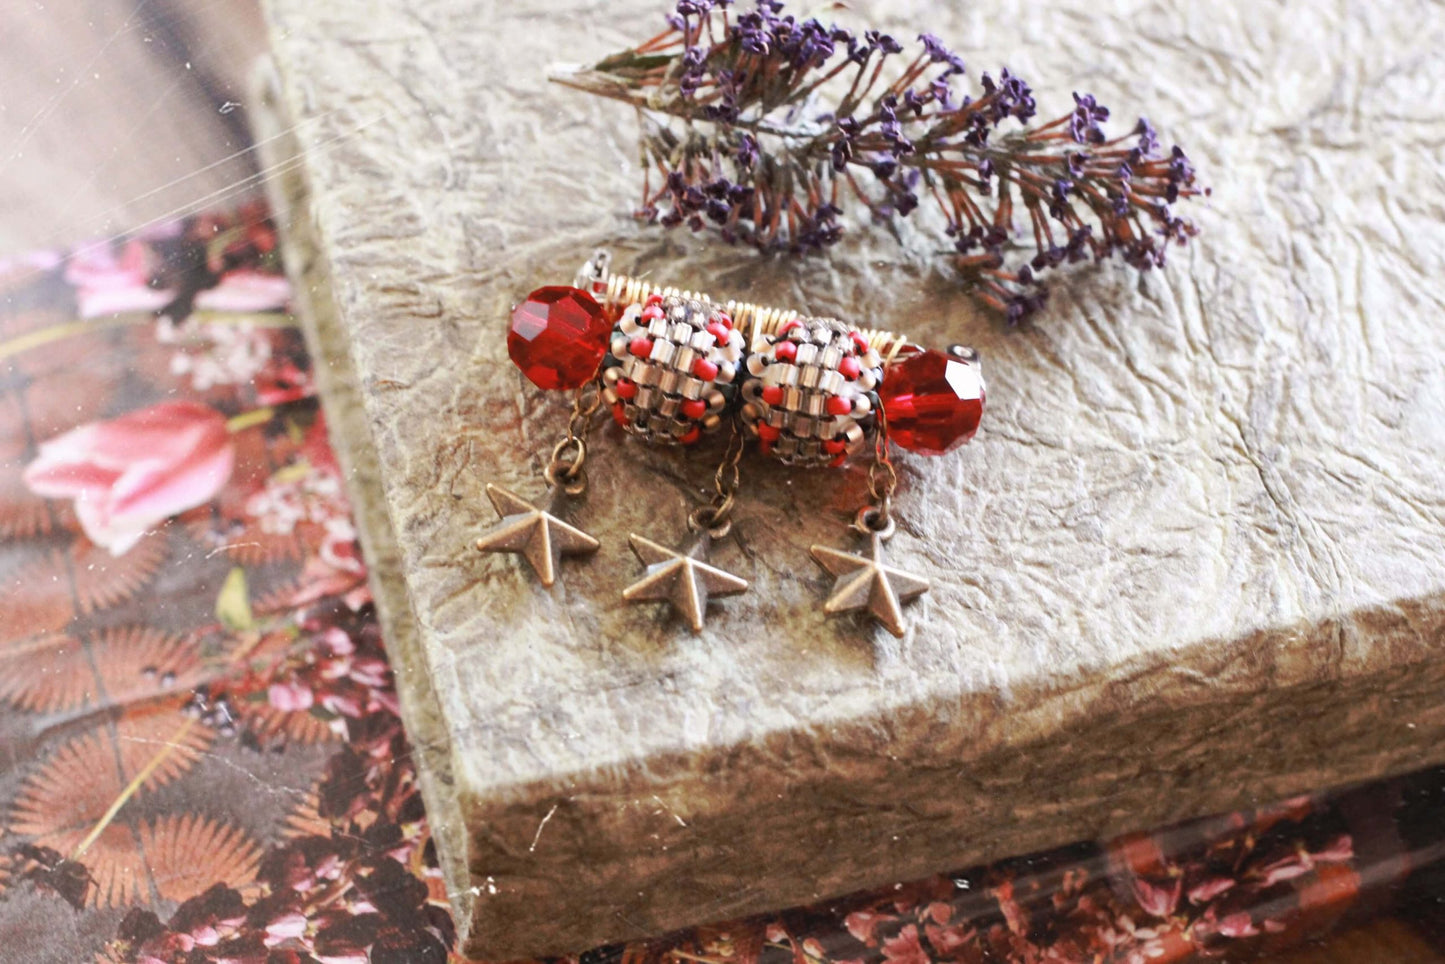 Red Crystal Vintage Inspired Star Brooch - 1940s Inspired Sweetheart Collection by Kaleidoscopes & Polka Dots